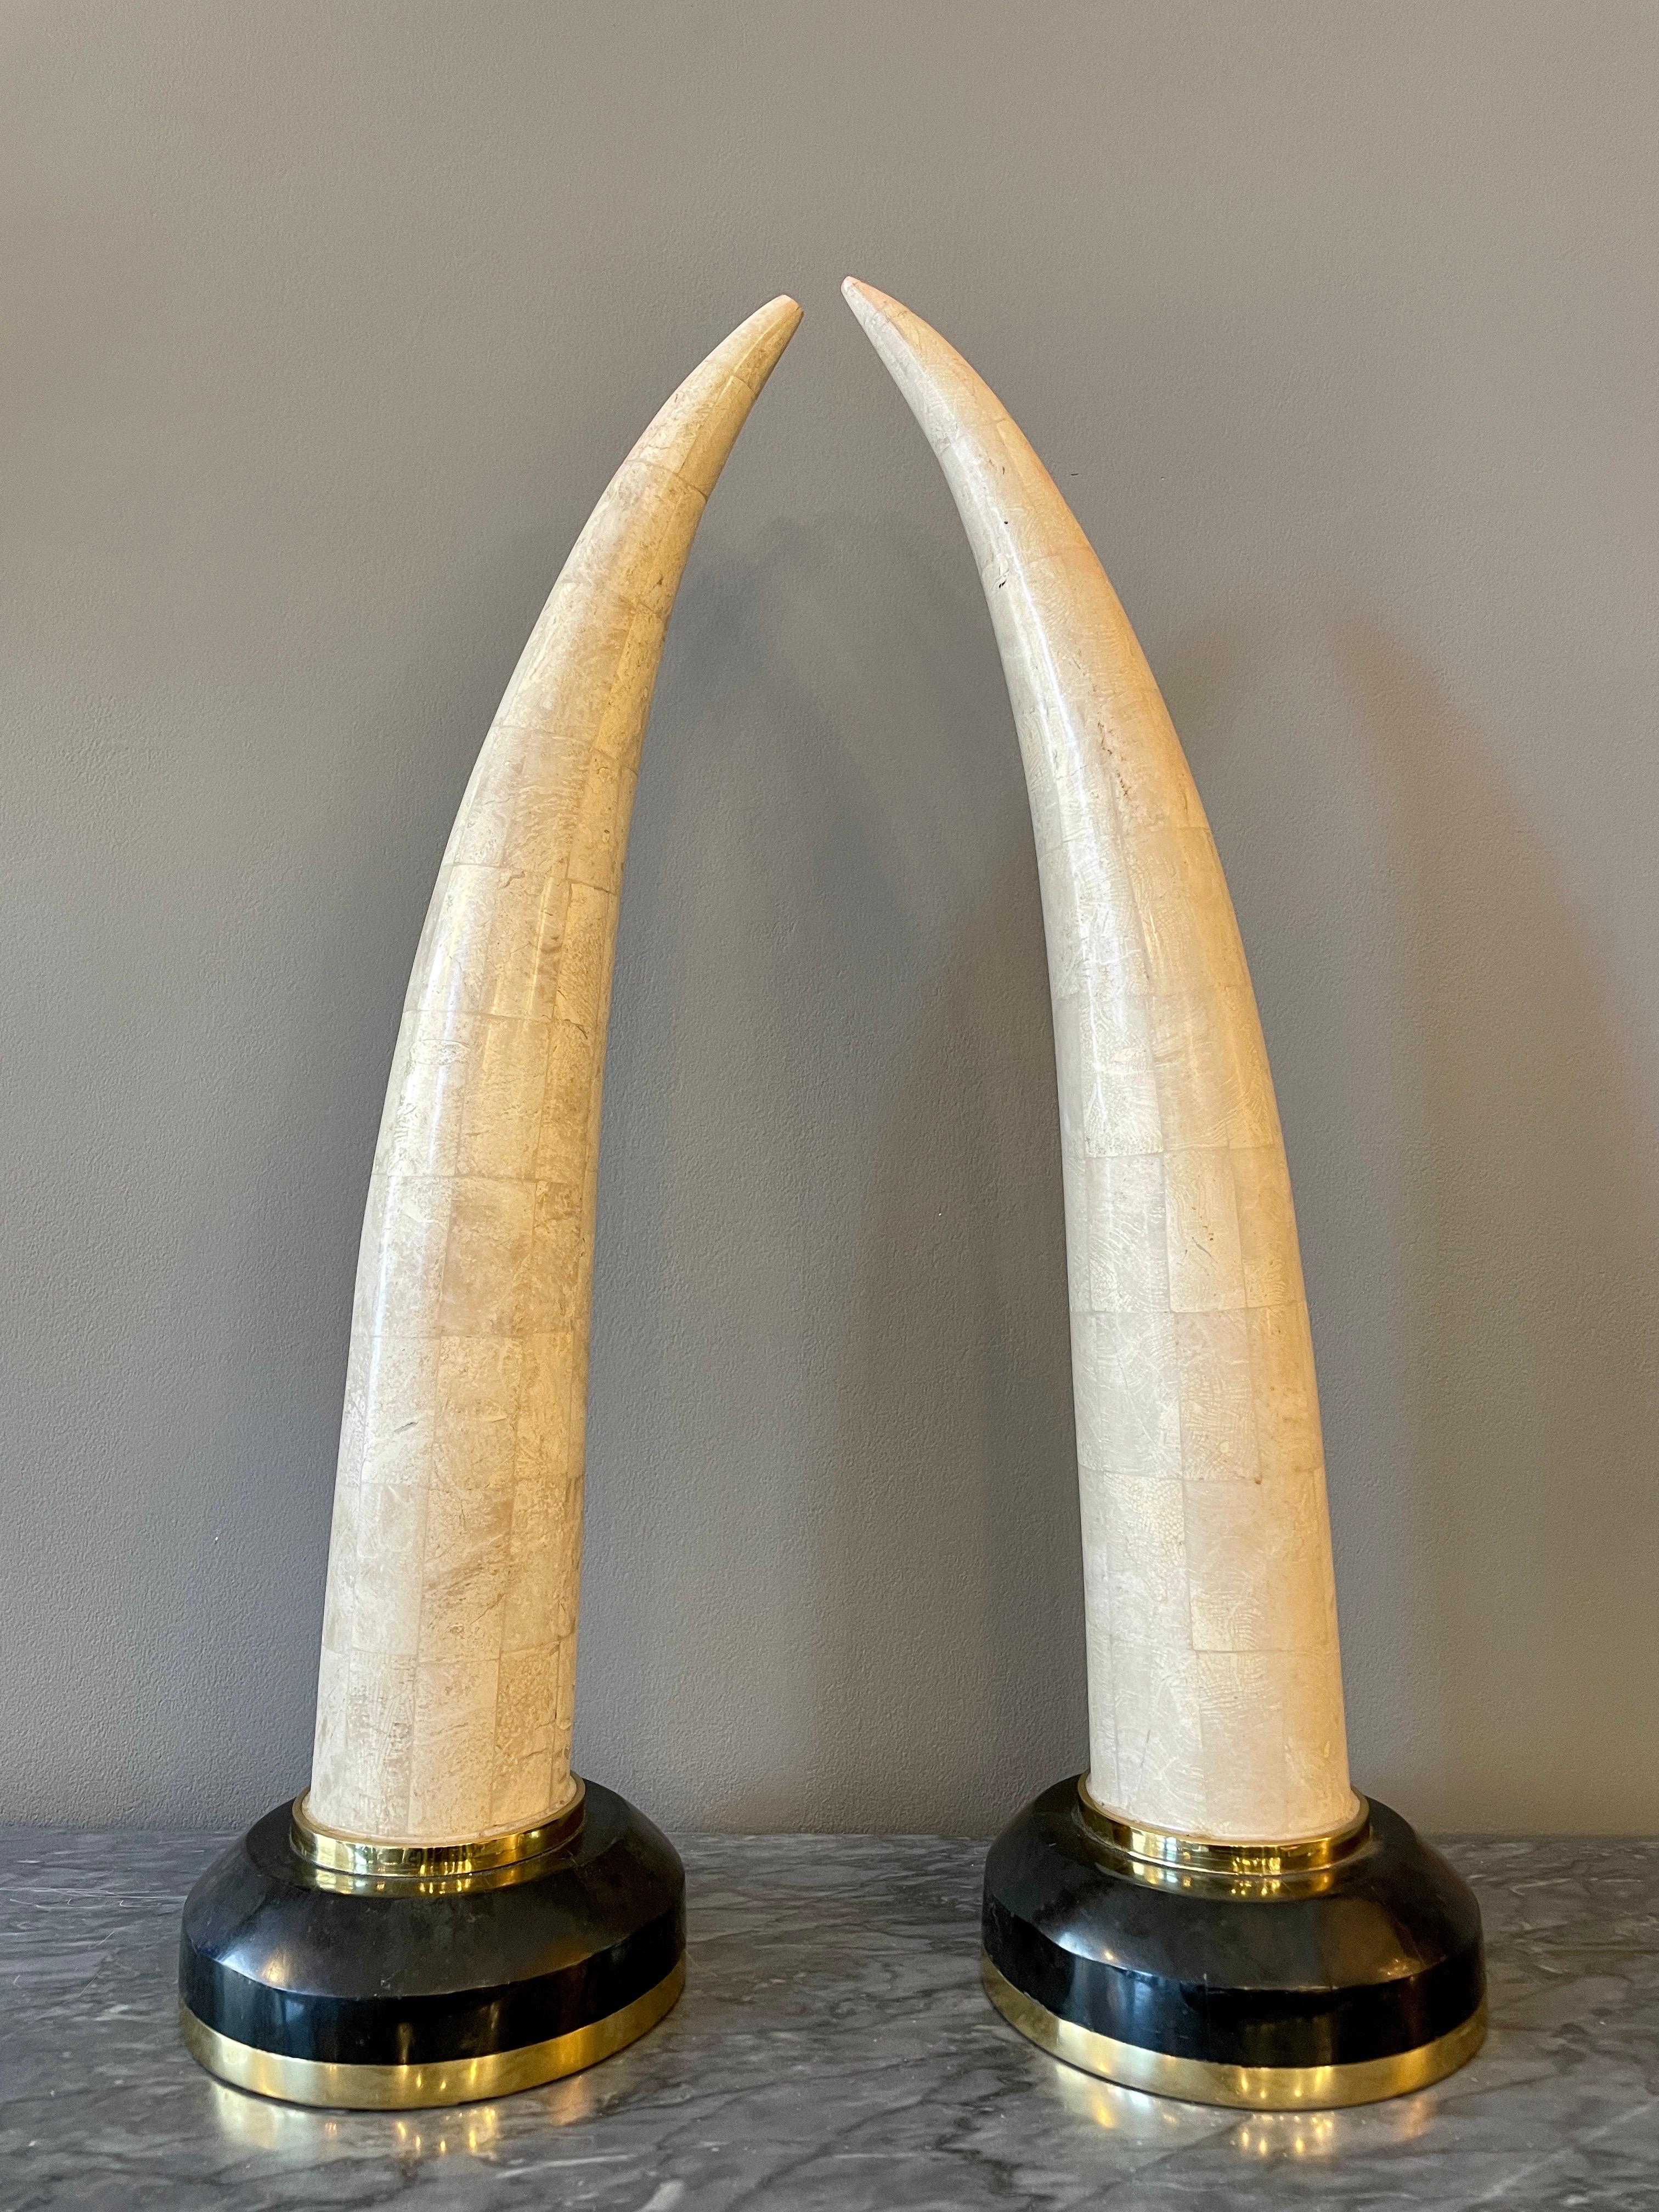 A pair of tall faux tusks in tessellated marble mounted on dark marble plinths with brass accents.

A tessellation or tiling is the covering of a surface, often a plane, using one or more geometric shapes, called tiles, with no overlaps and no